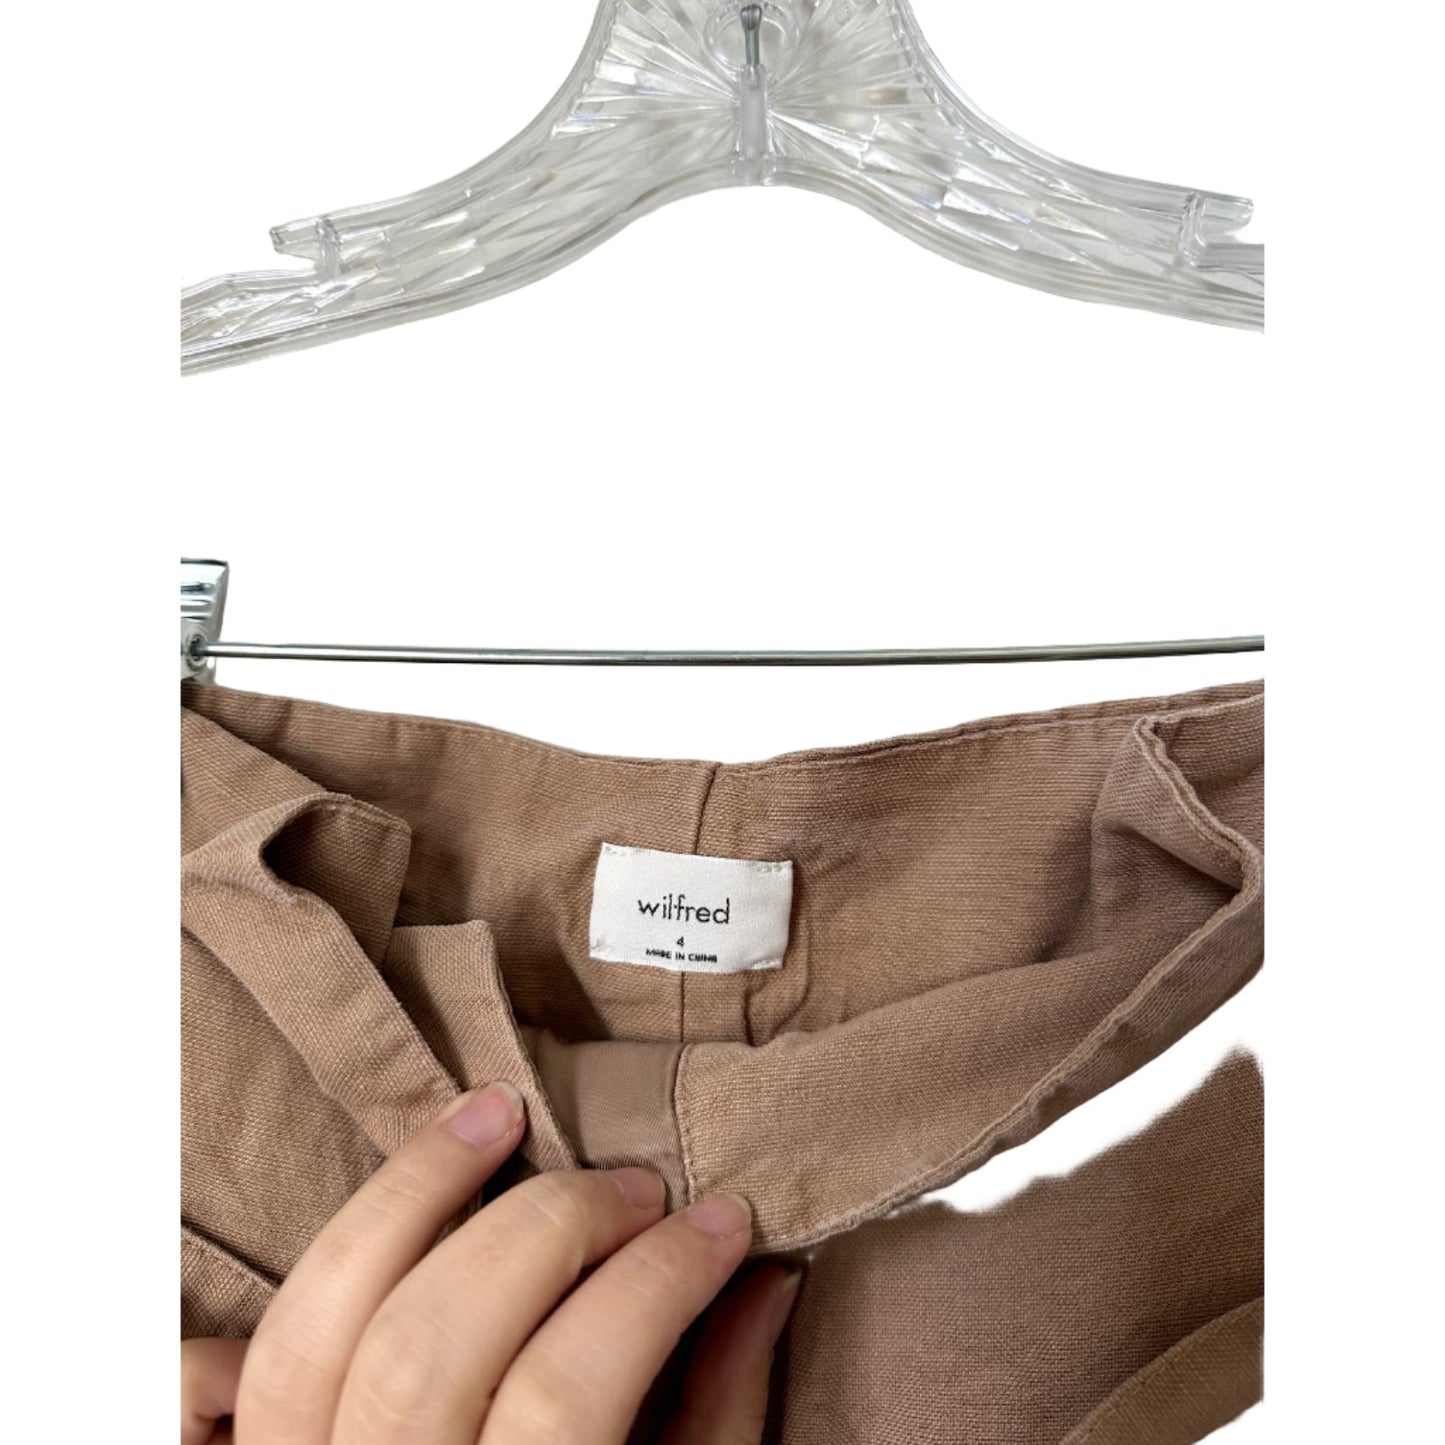 Aritzia Wilfred Paperbag Pants,  Size 4